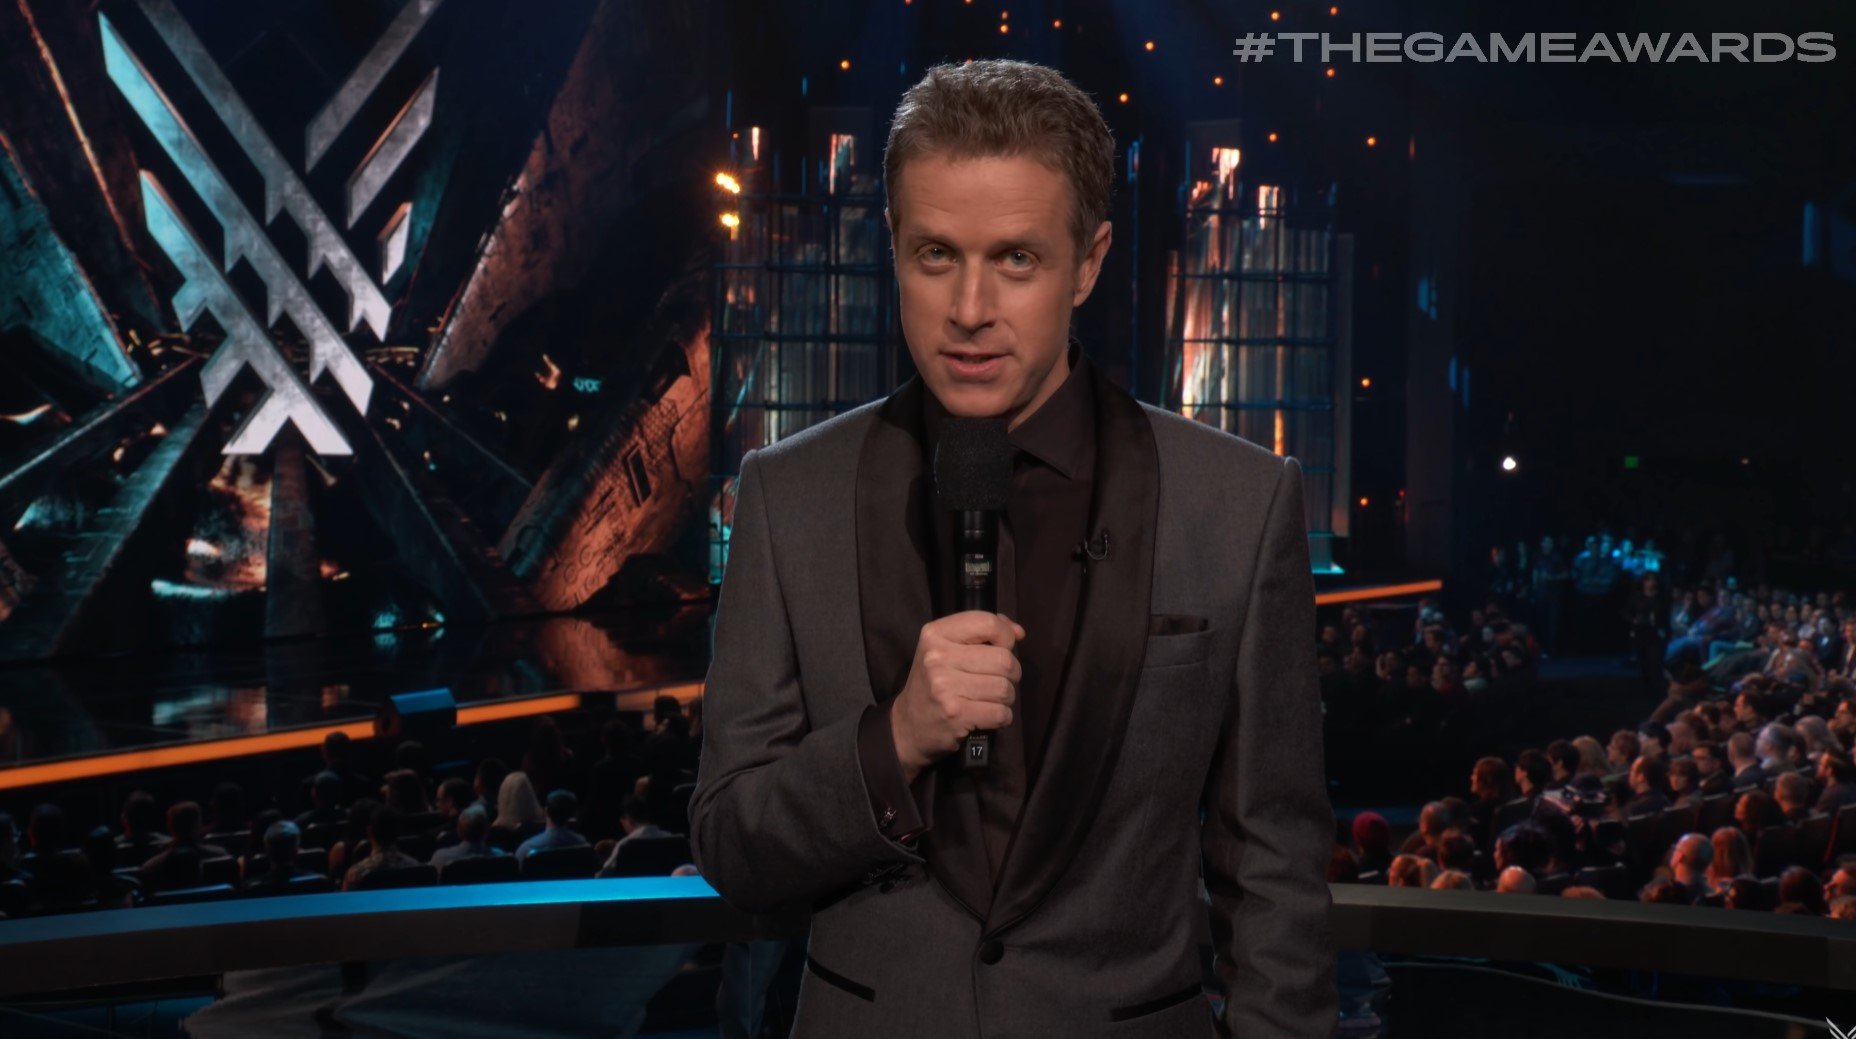 The Game Awards 2022 cuts back with “fewer bigger games”